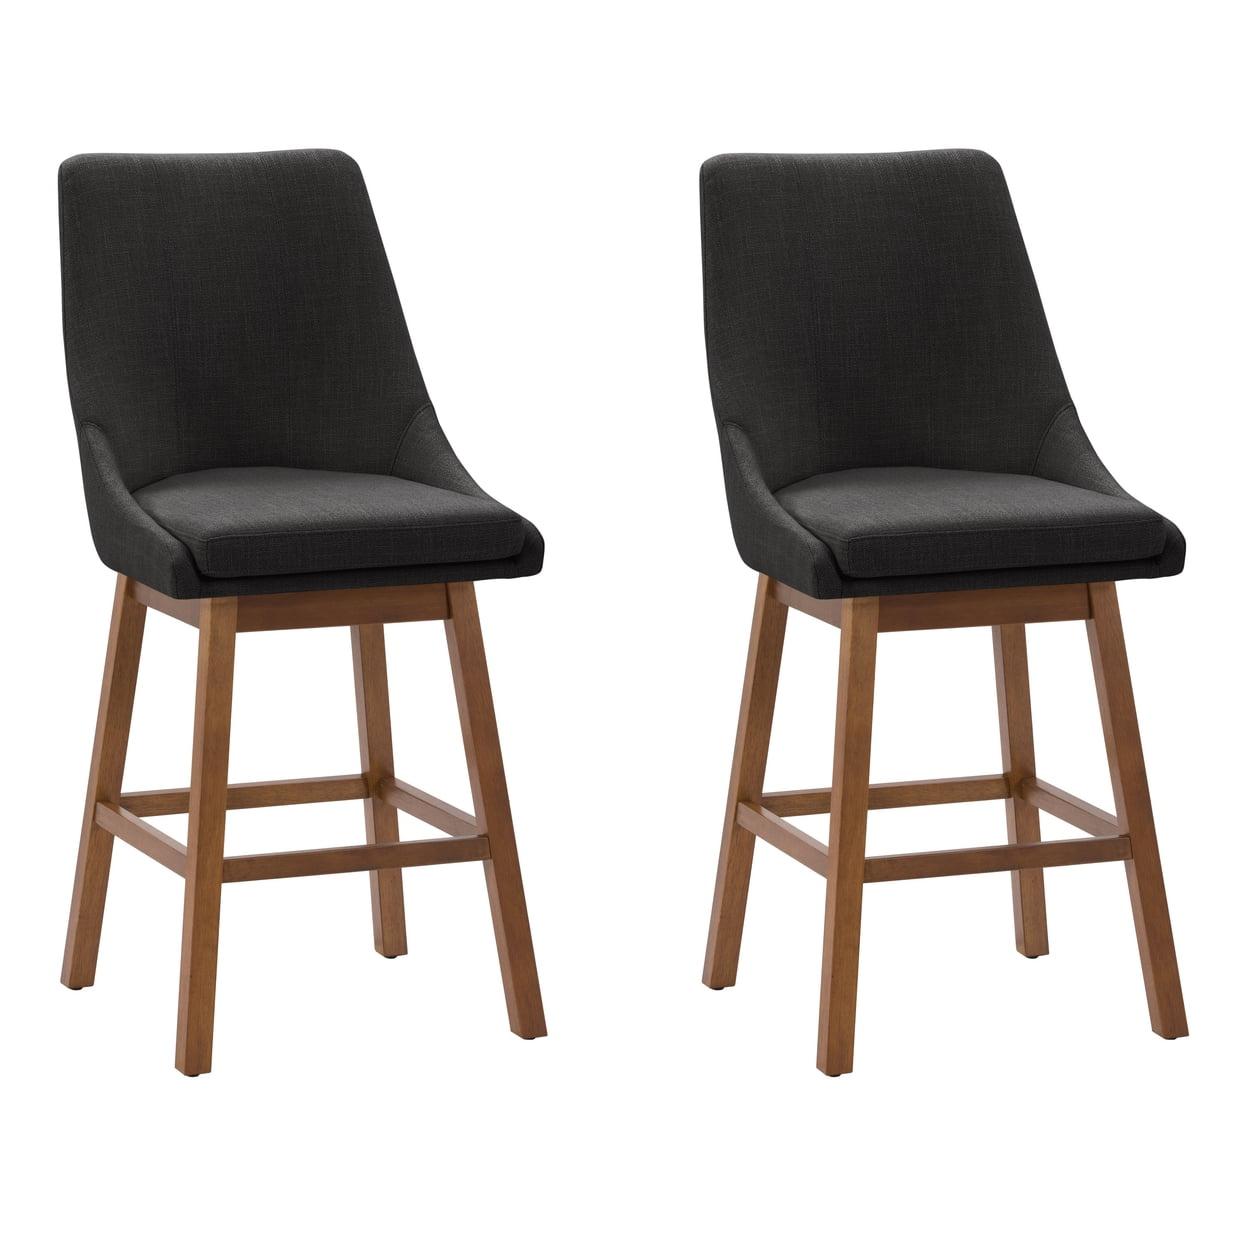 Luca Dark Gray Fabric Upholstered Counter Bar Stools with Brown Wood Legs - Set of 2